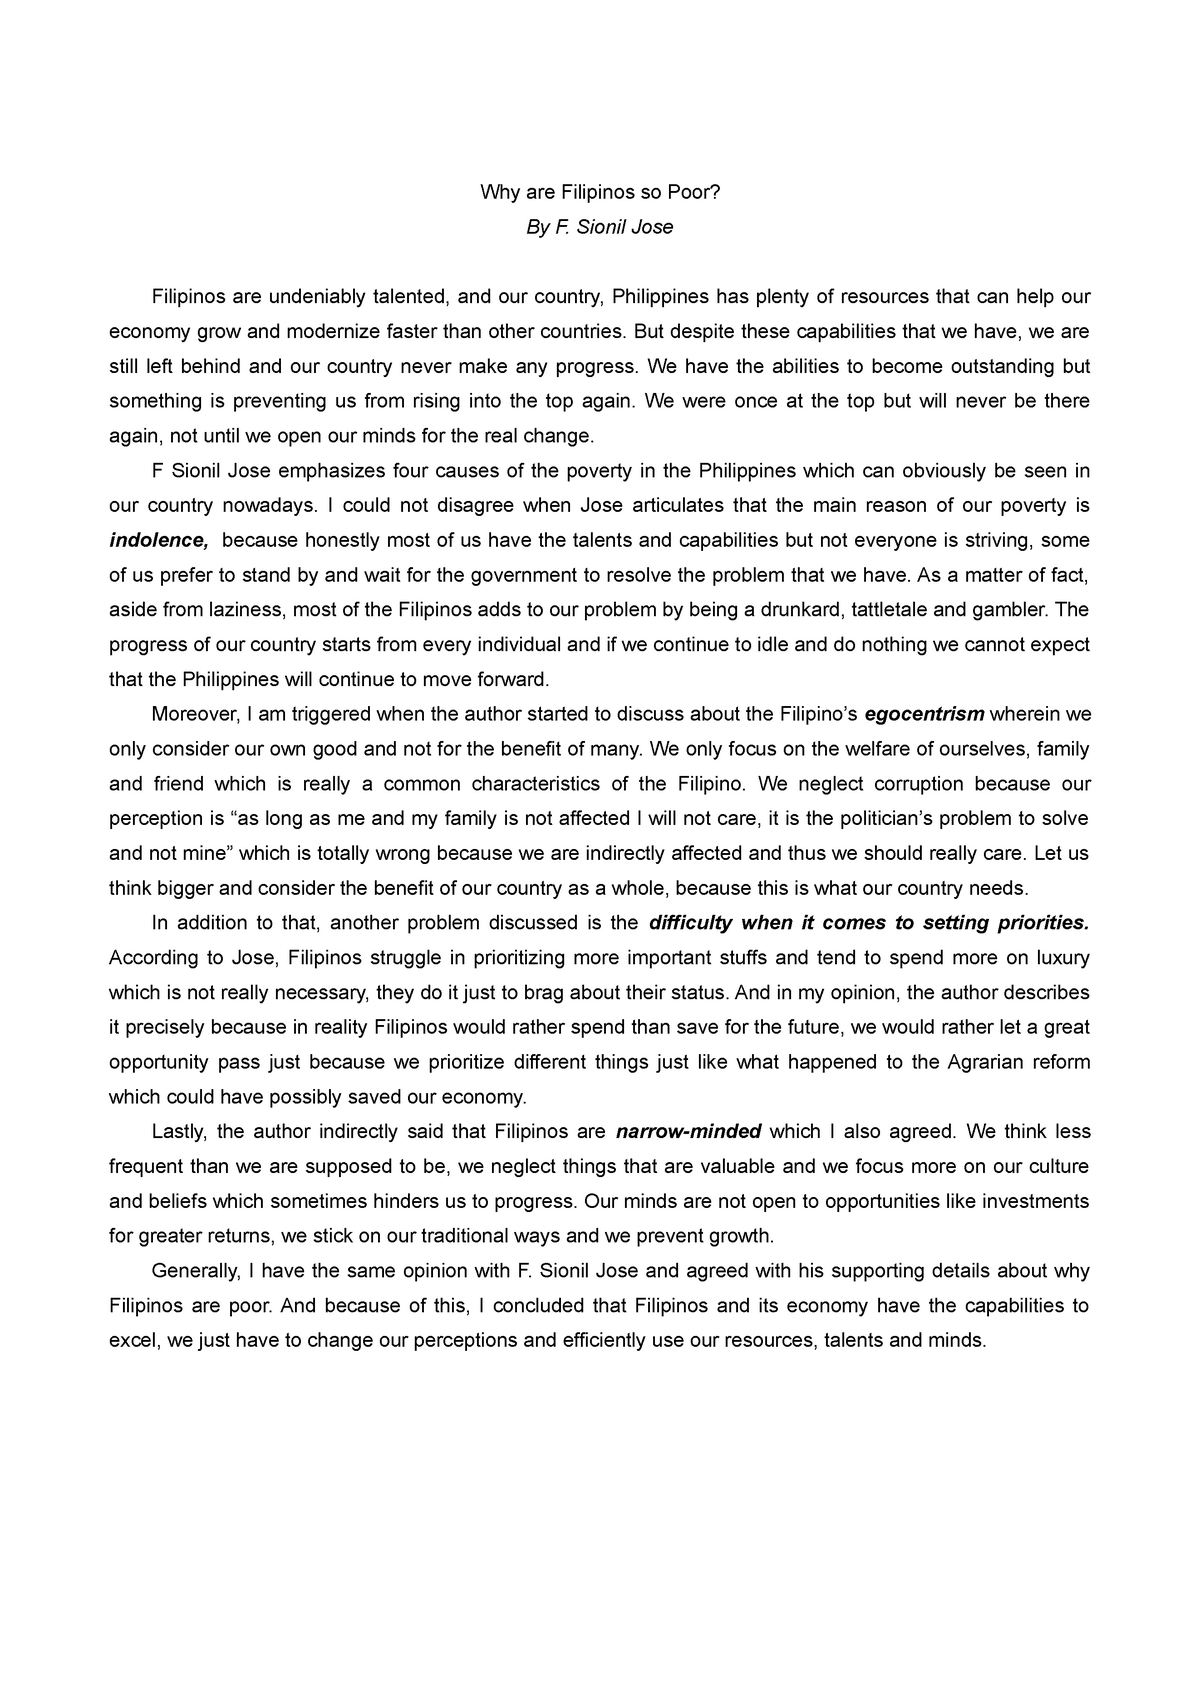 persuasive essay about poverty in the philippines